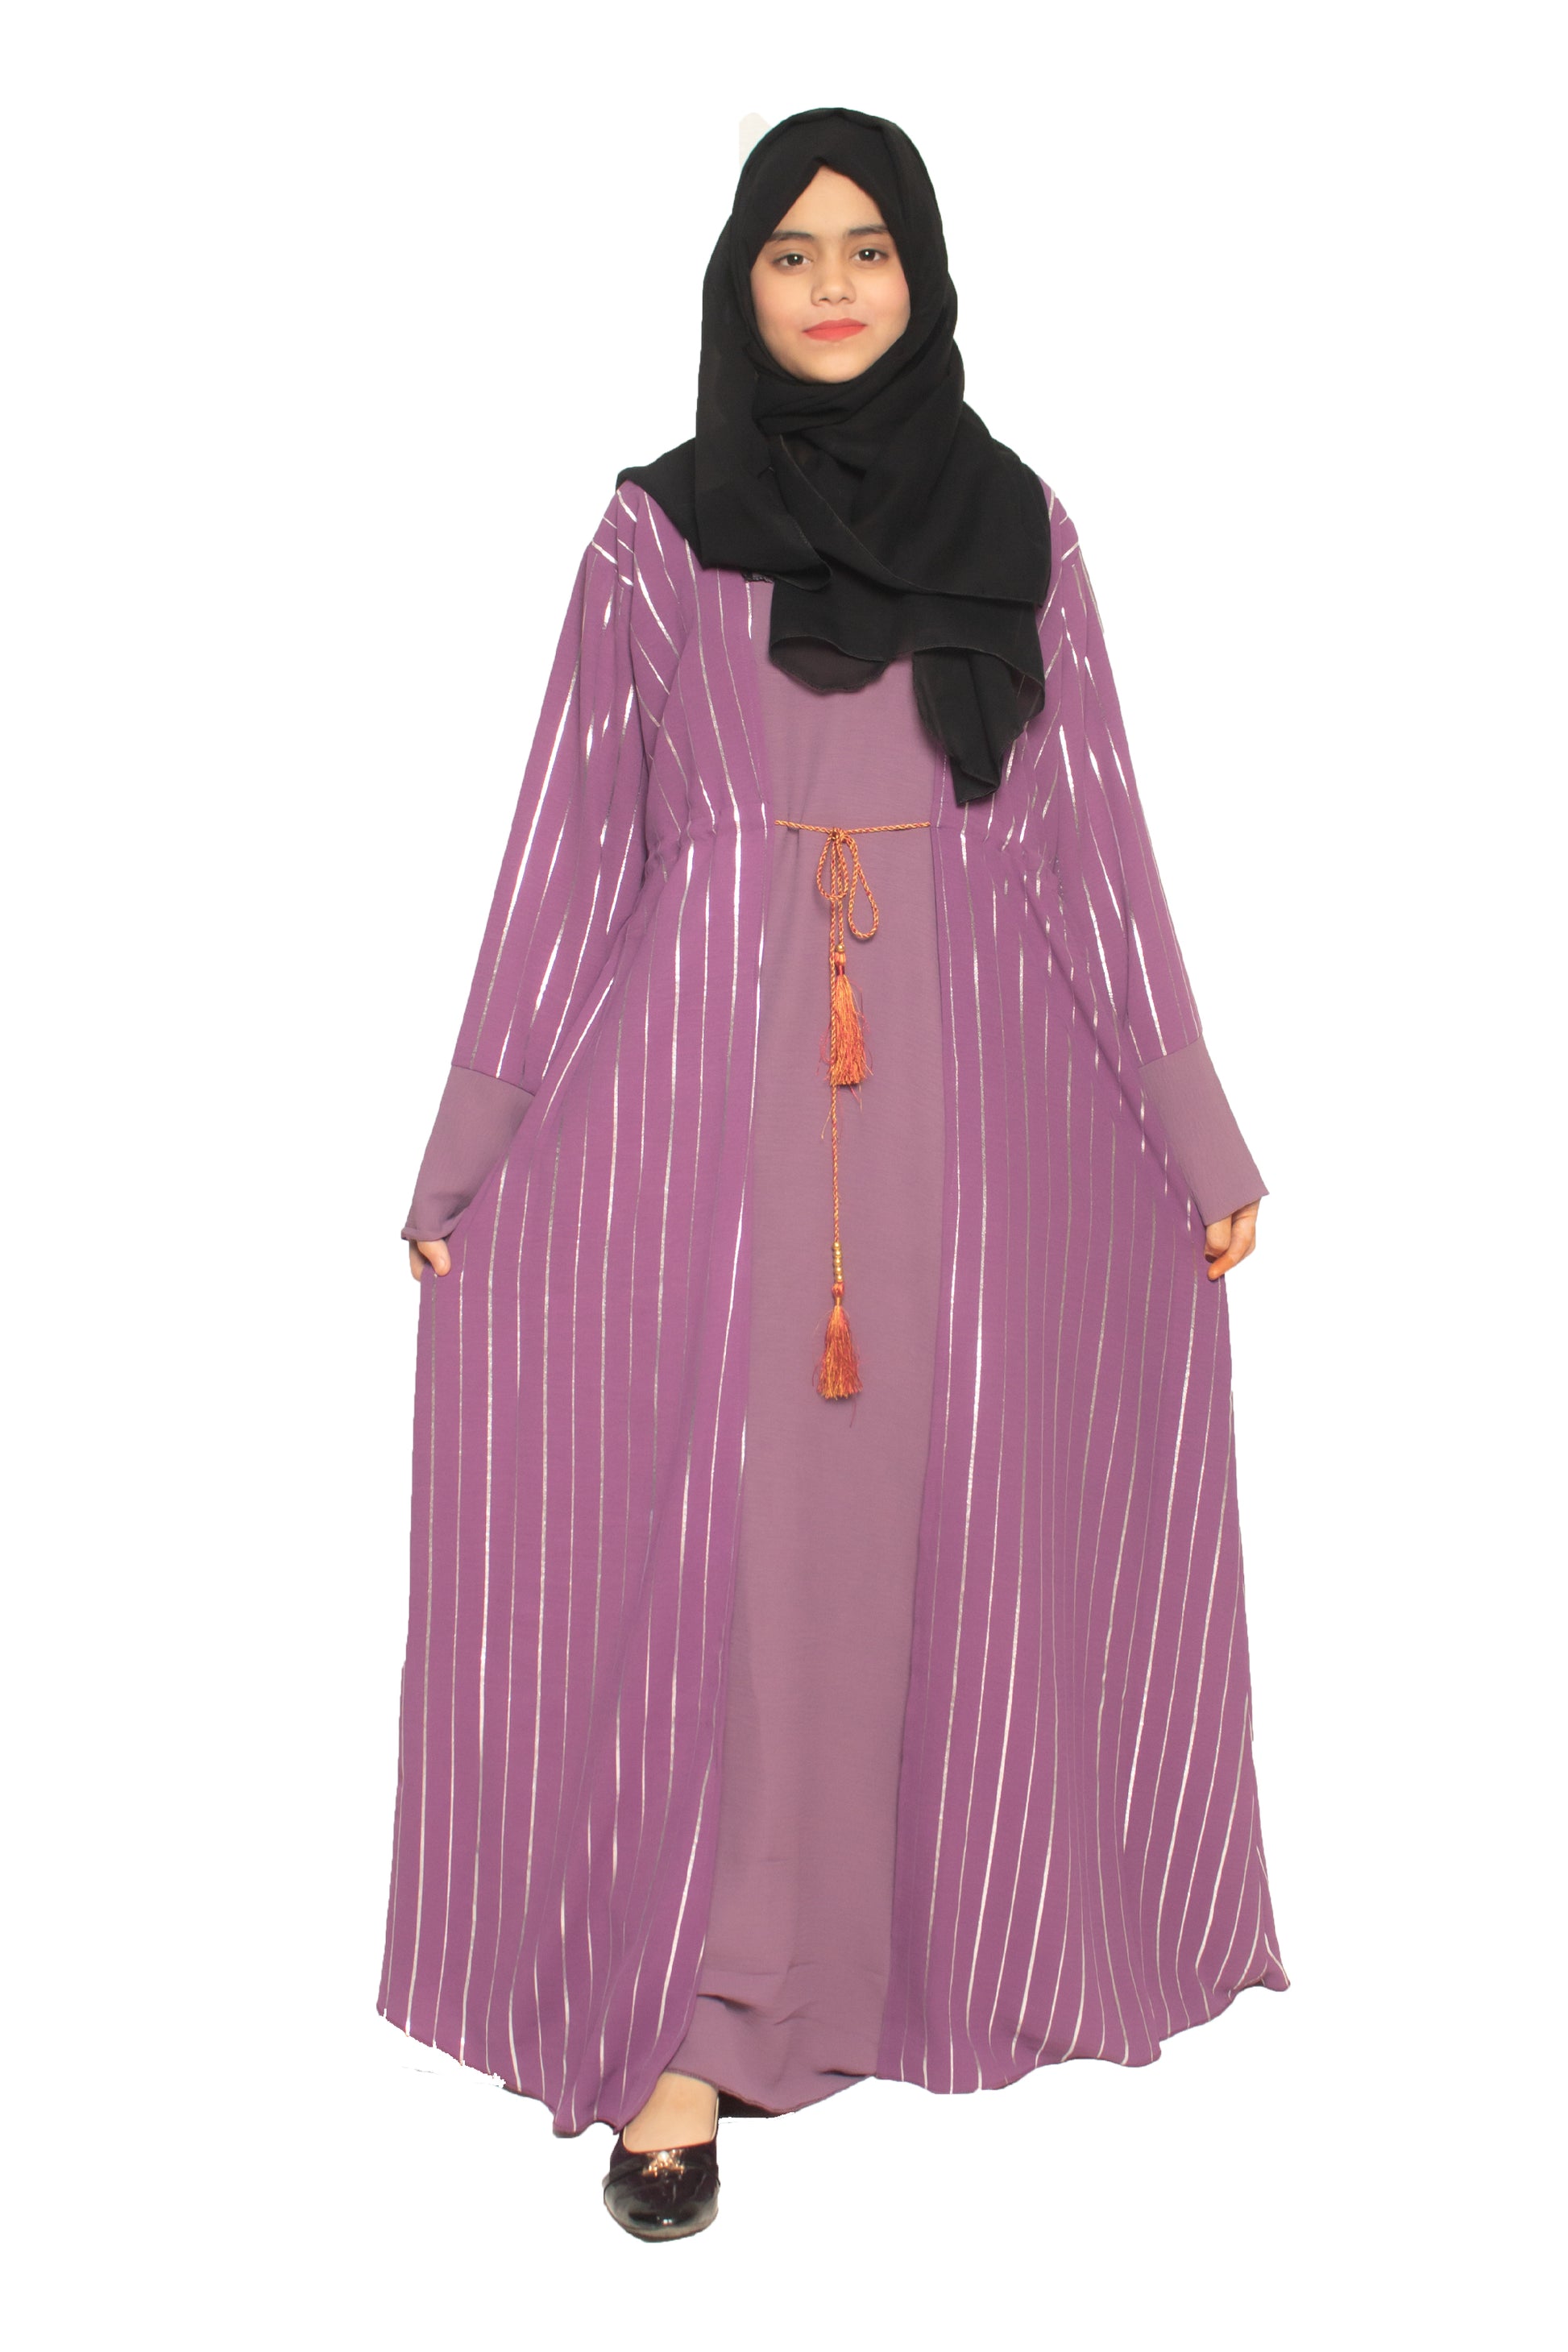 Modest City Self Design Purple Parallel Stripes With Ribbon Abaya or Burqa With Hijab for Women & Girls-Series Laiba